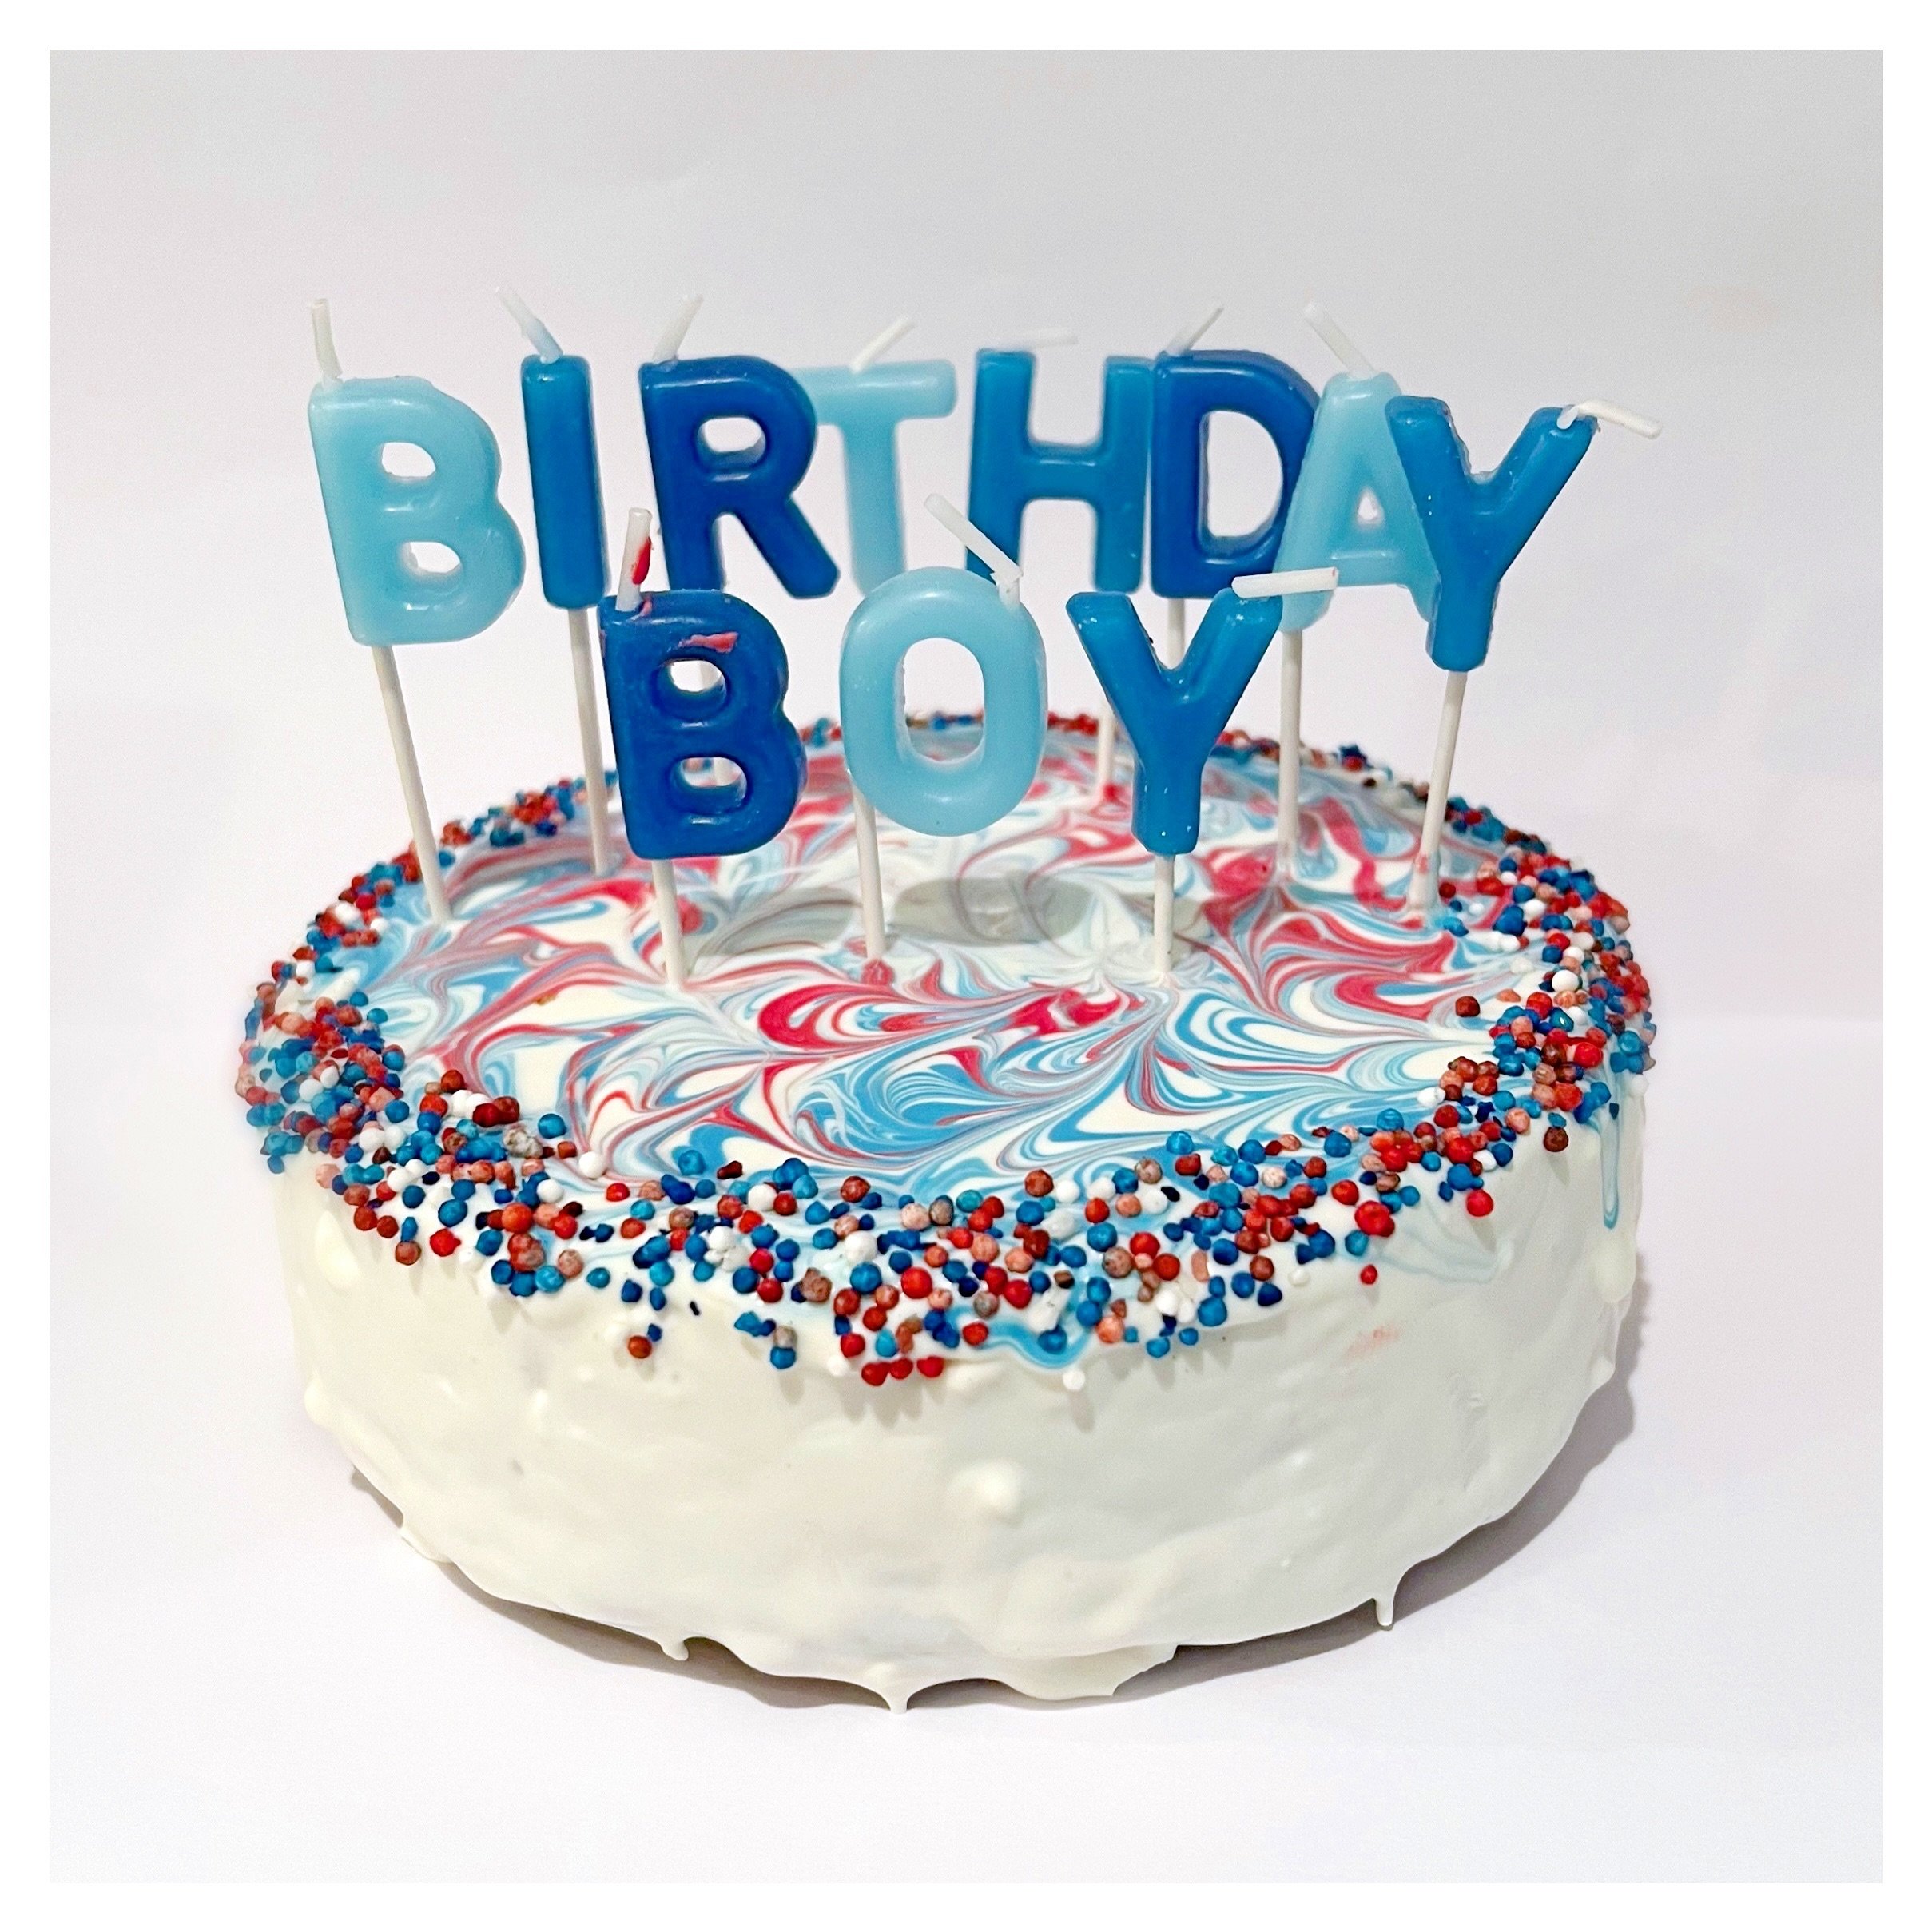 Boris celebrated his 7th birthday over the weekend. His parents requested a blue &amp; red cake made with our new soft cake recipe and classic yogurt frosting. Contact us to order your custom cake today 💙❤️